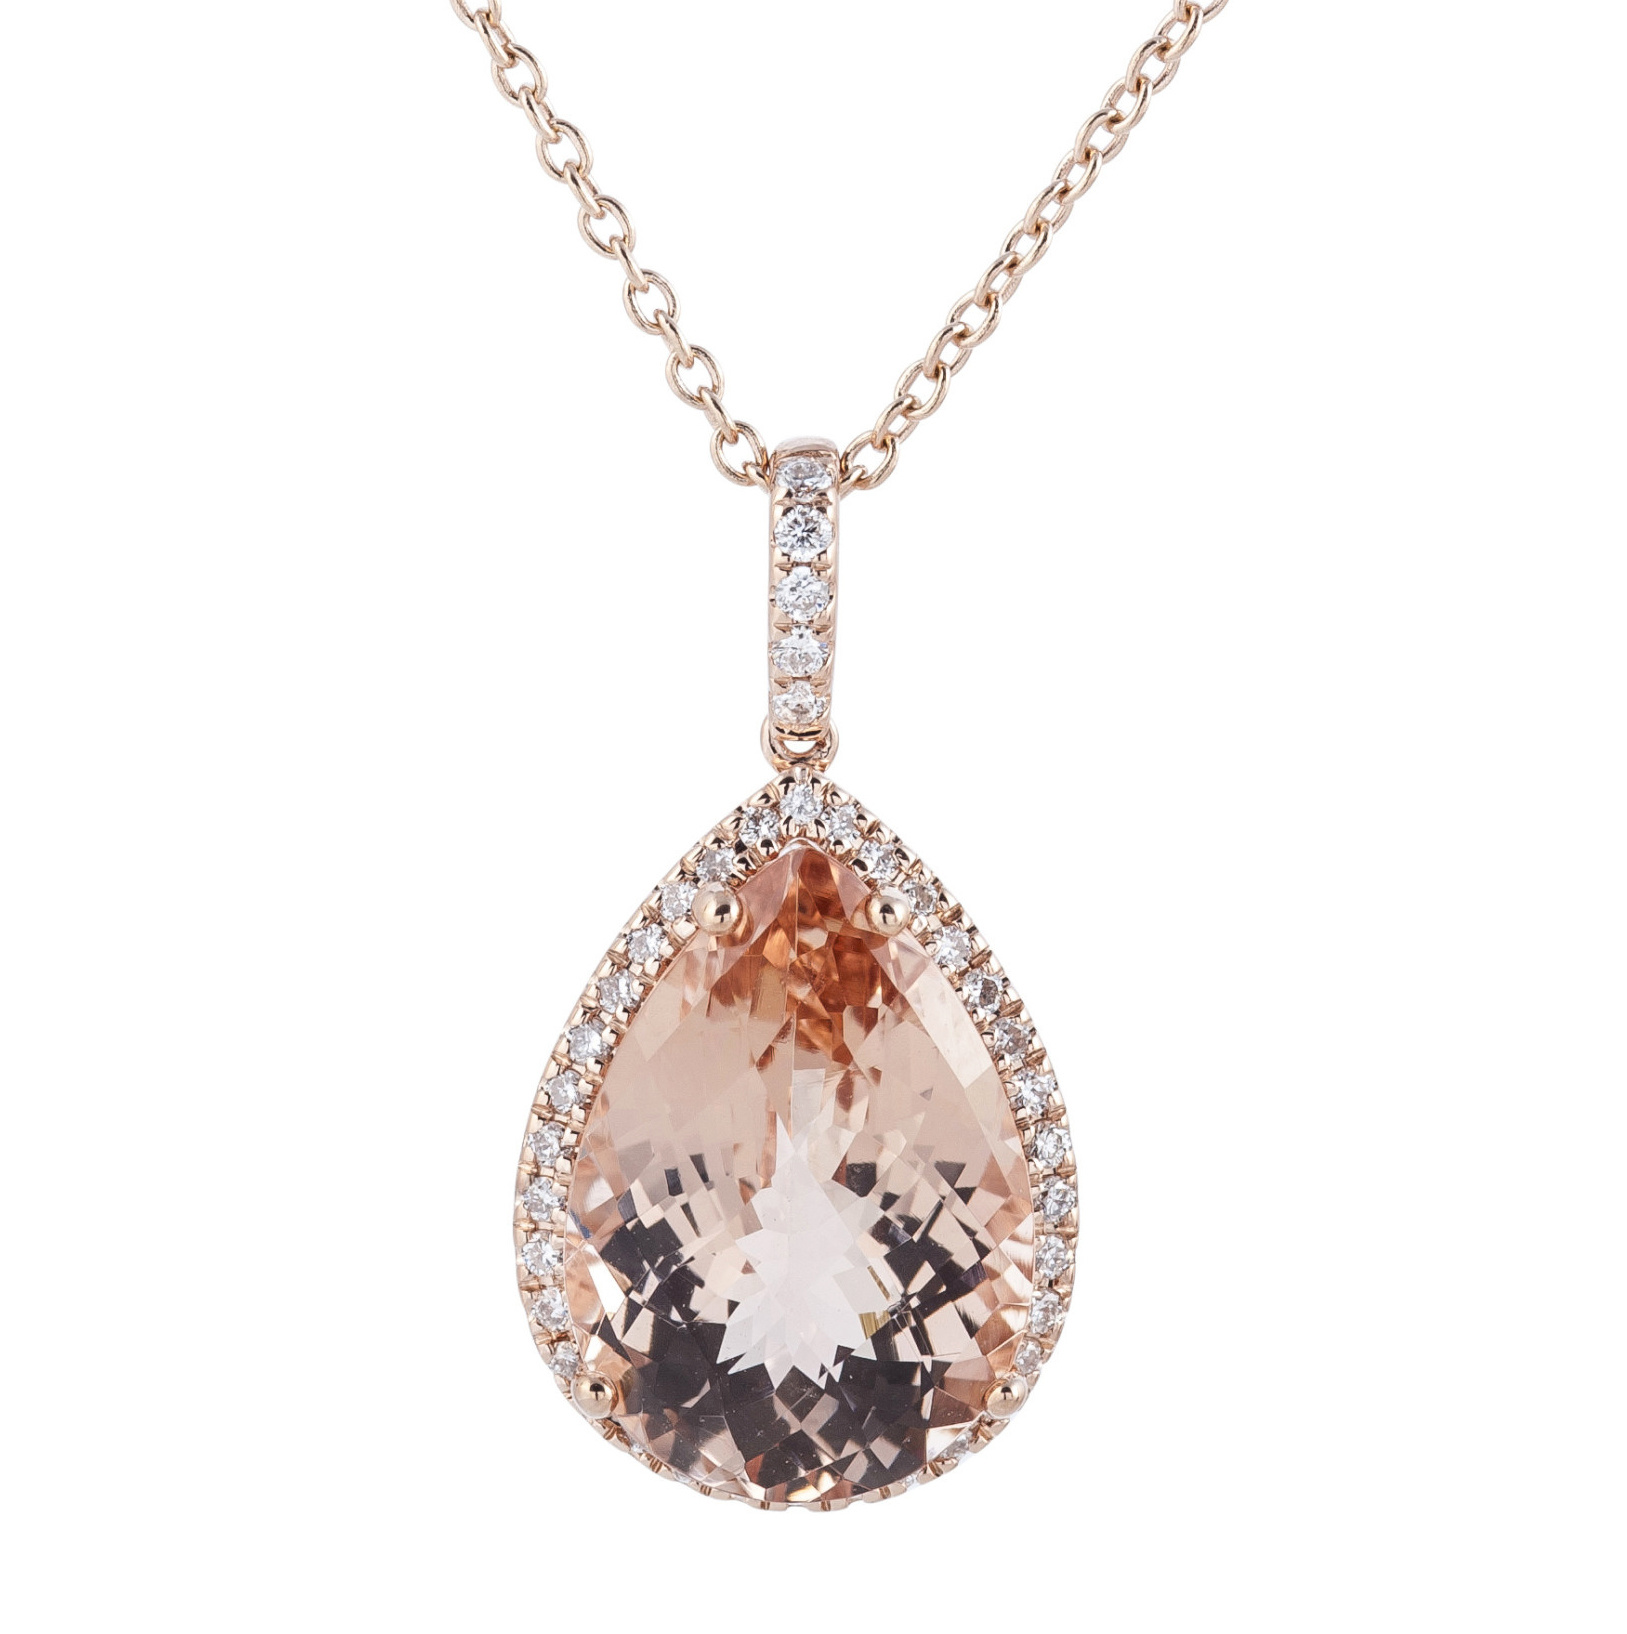 Morganite Solitaire Necklace Pendant Round With Diamonds 6mm